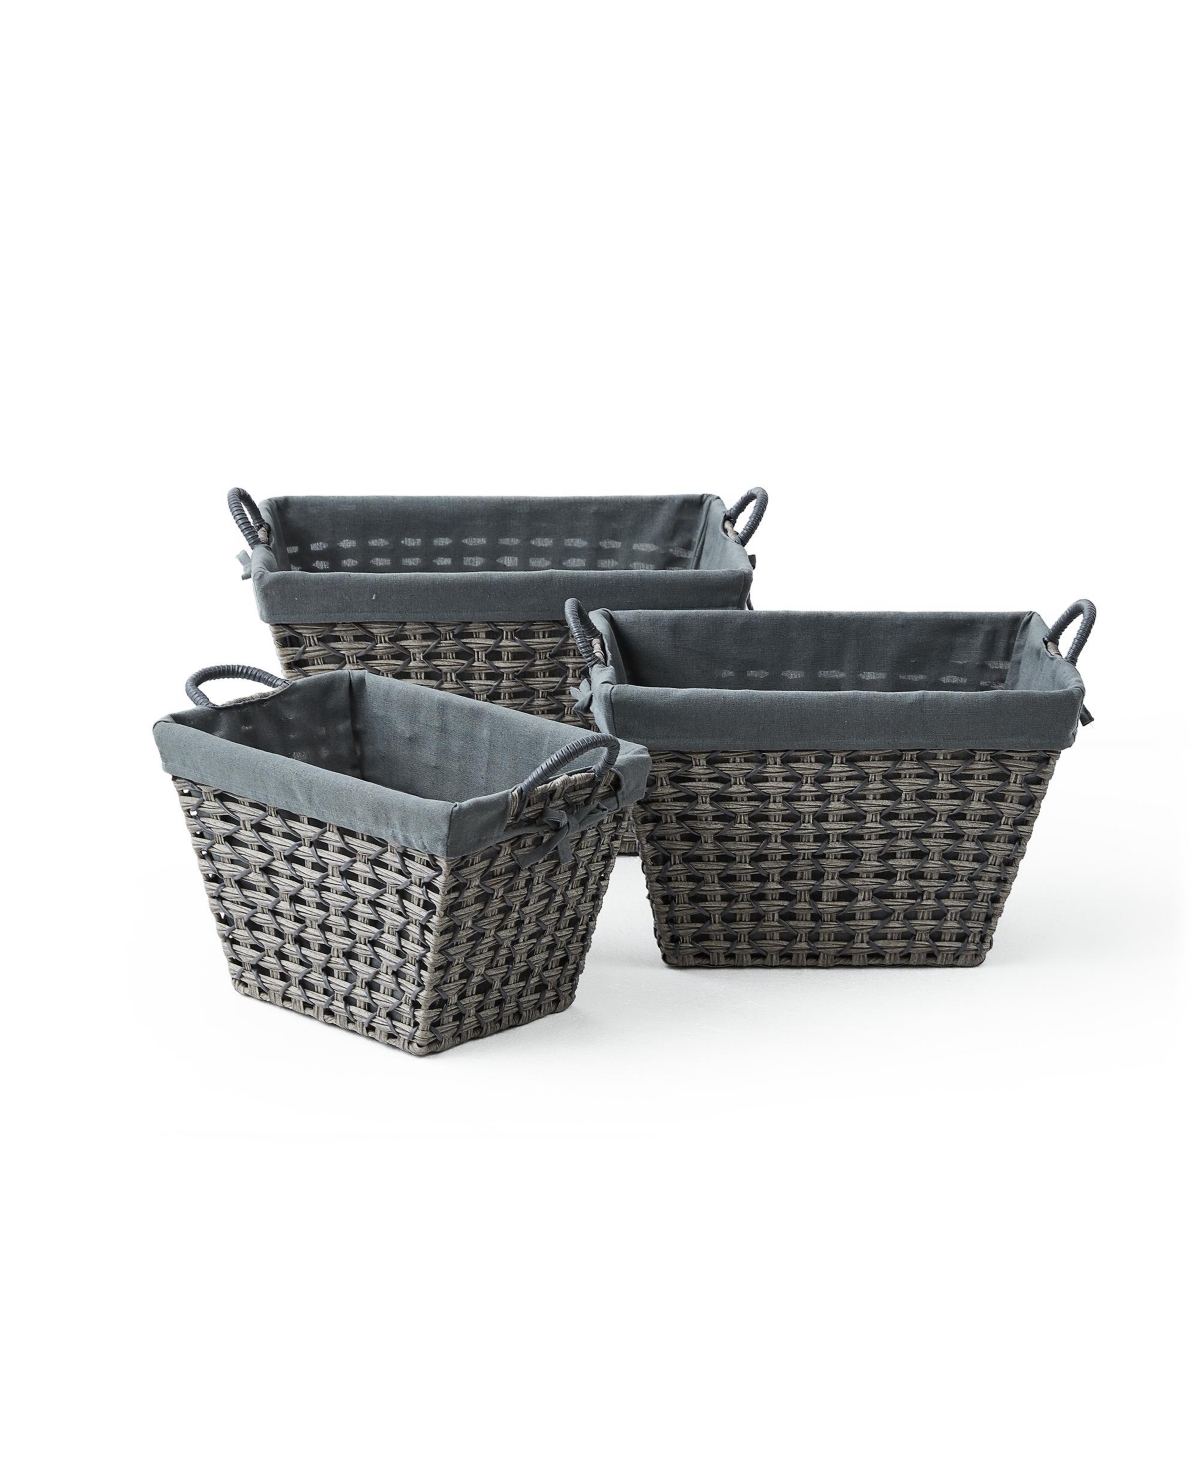 3 Piece Tapered Rectangular Storage Set in Open Weave with Ear Handles and Overlap Lift-Off Liner - Gray